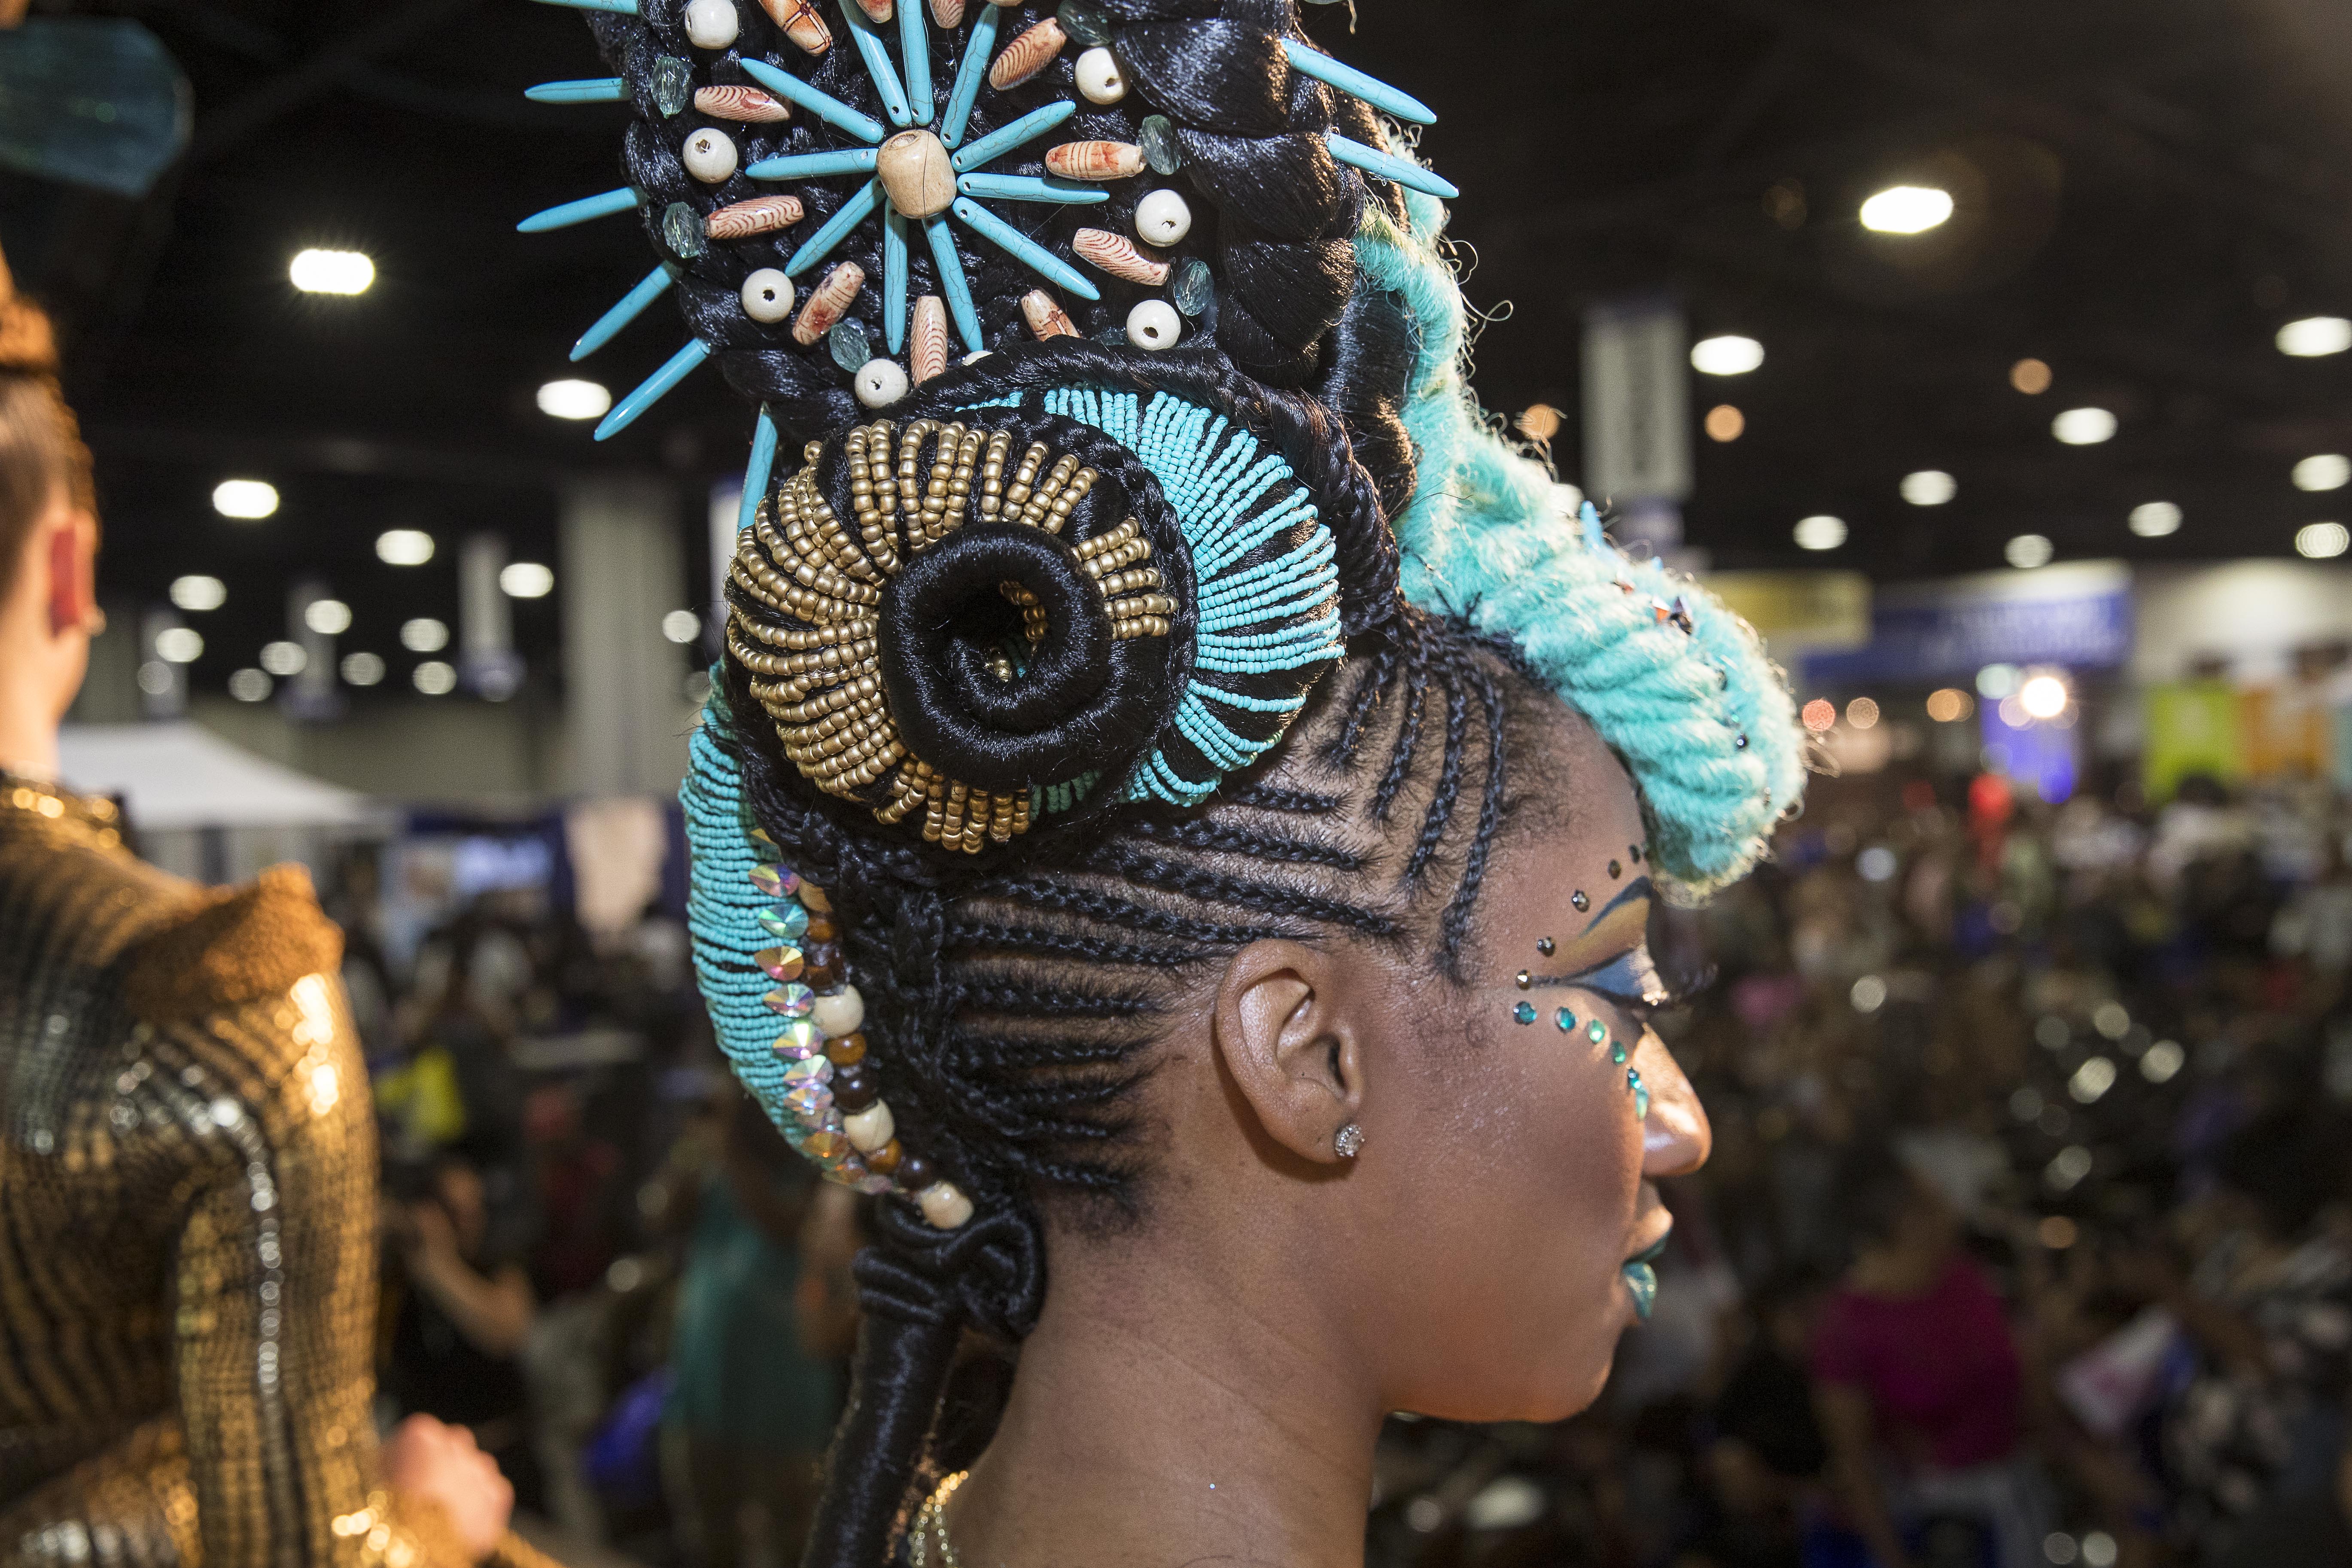 Stylish hair steals the show at Bronner Bros. event in Atlanta